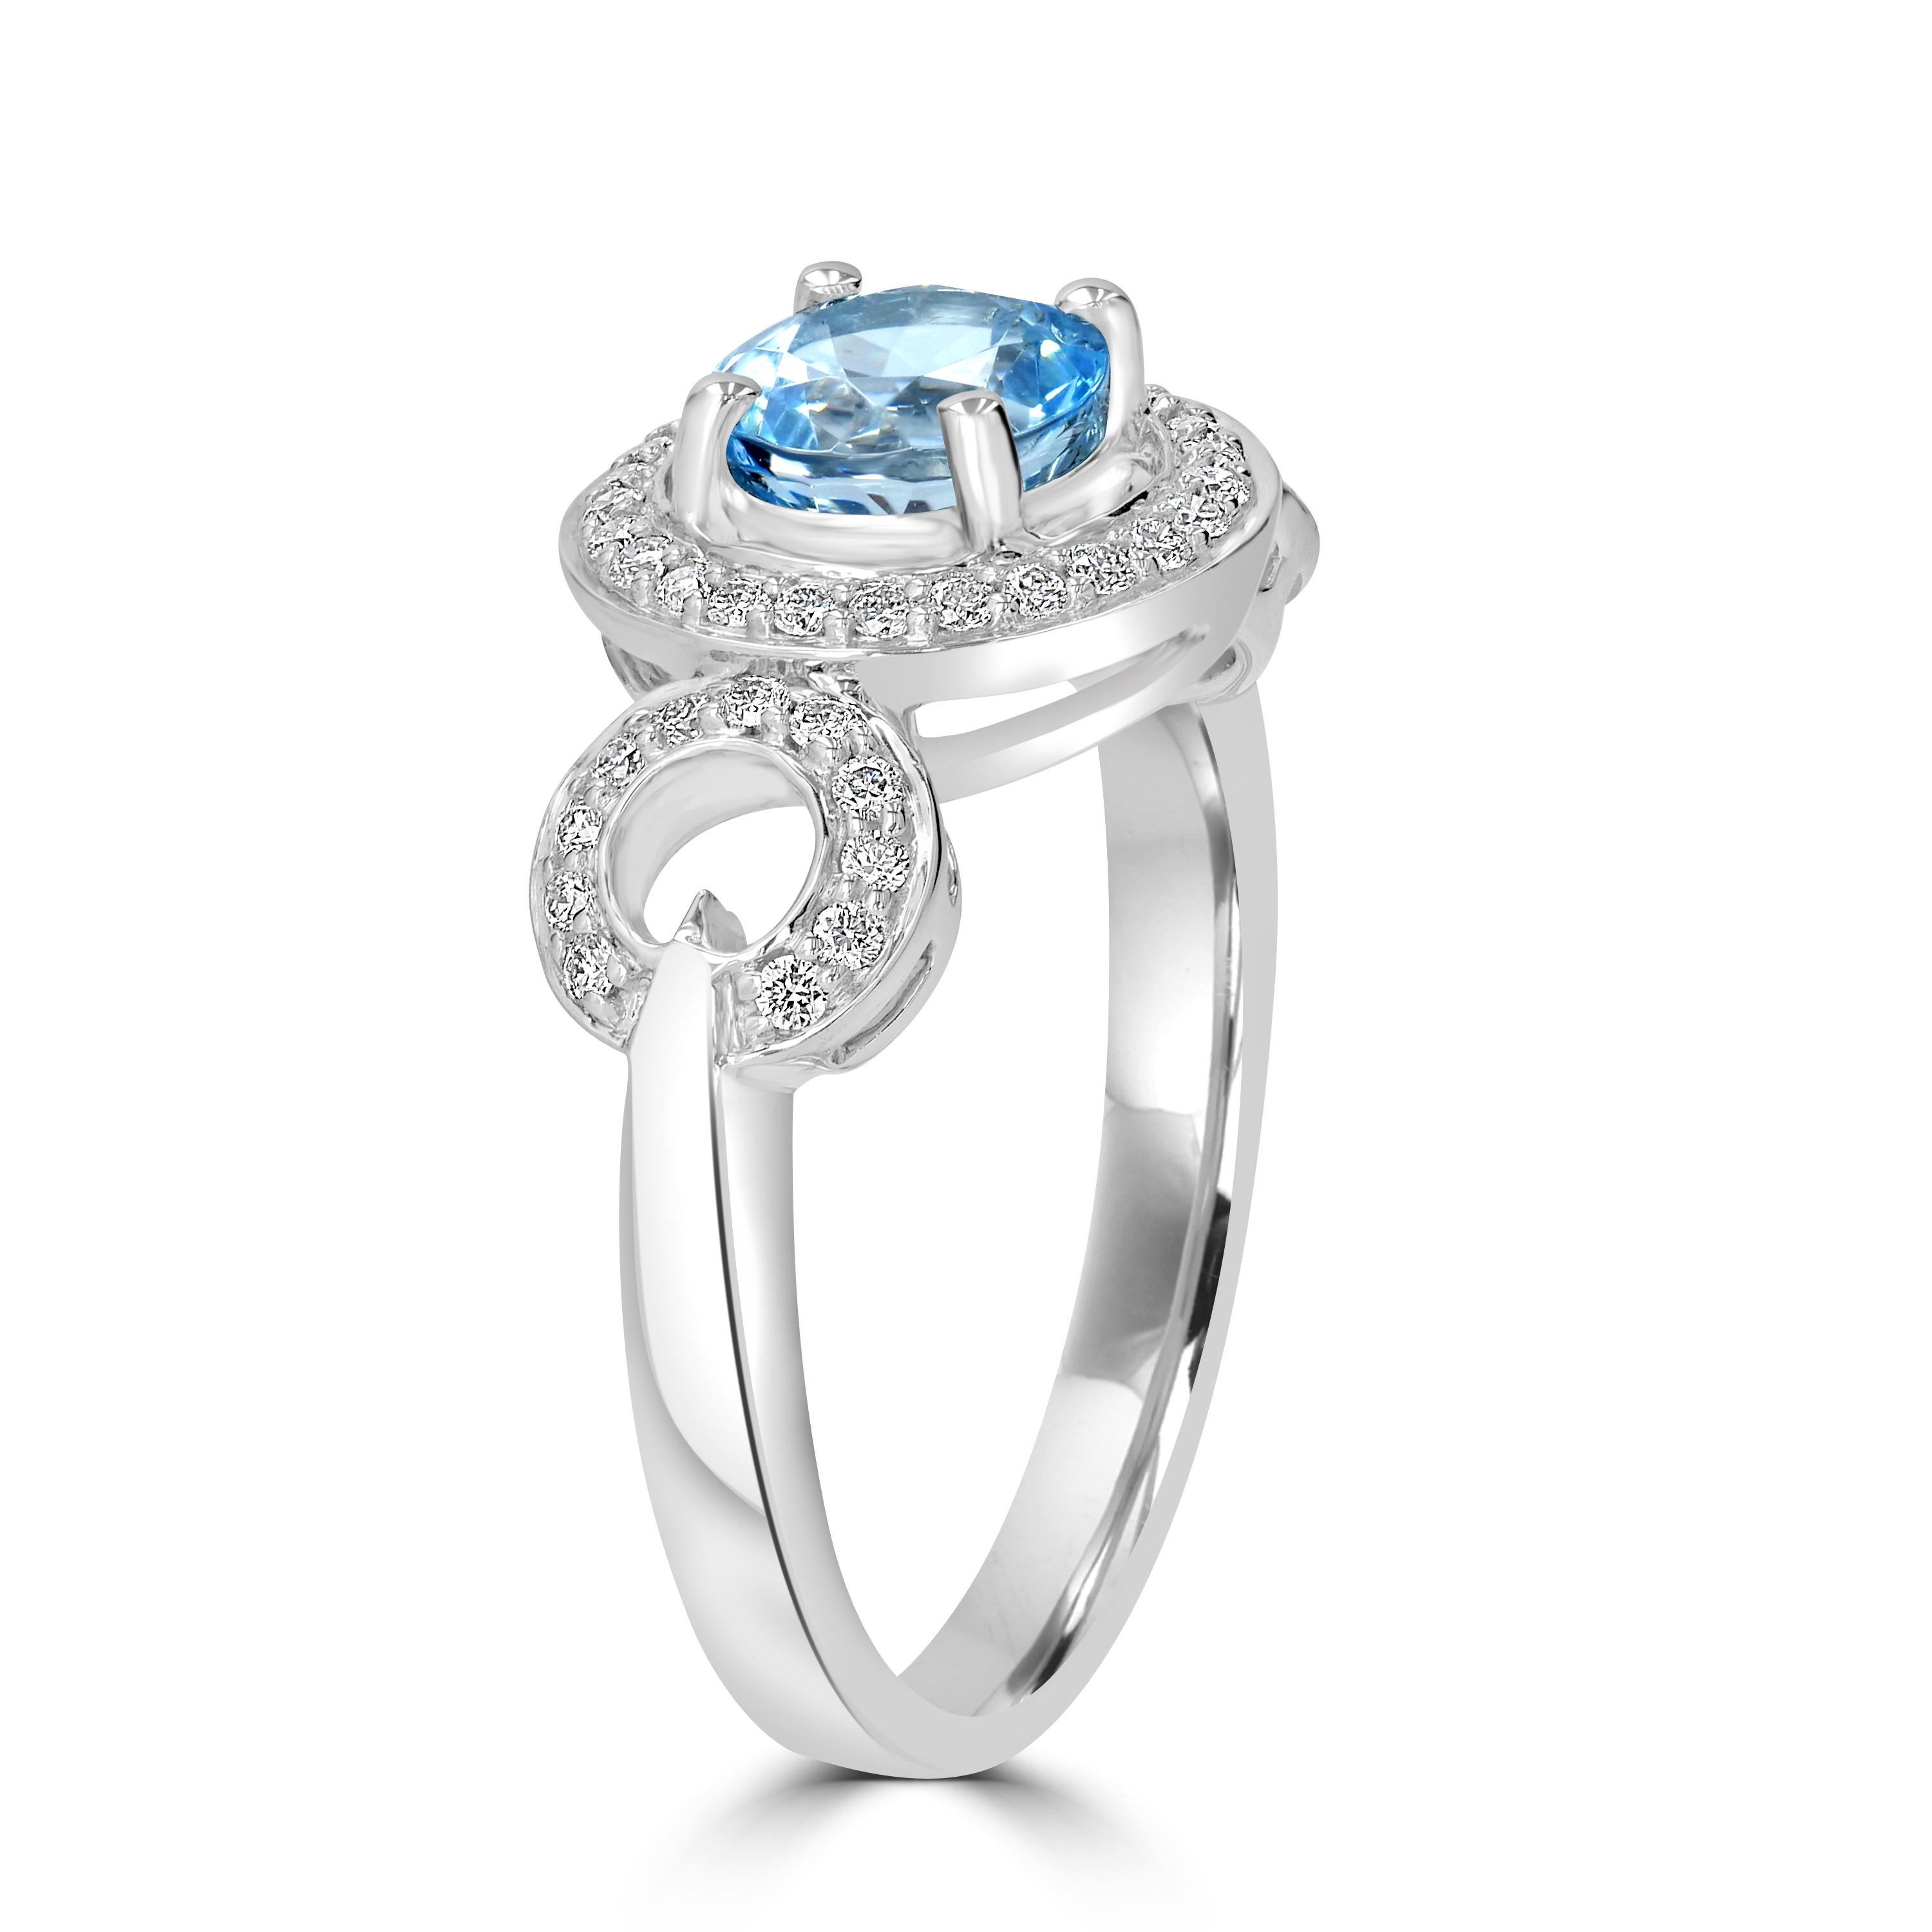 This Beautiful Piece Of Jewelry Features A Round Shaped Aquamarine Gemstone & Diamonds Made In 14K White Gold That Lead Shimmering Appeal To This Sweet & Whimsical Ring.
This March Birth Stone Ring Will Be Perfect Gift For Your Loved Ones.

Style#